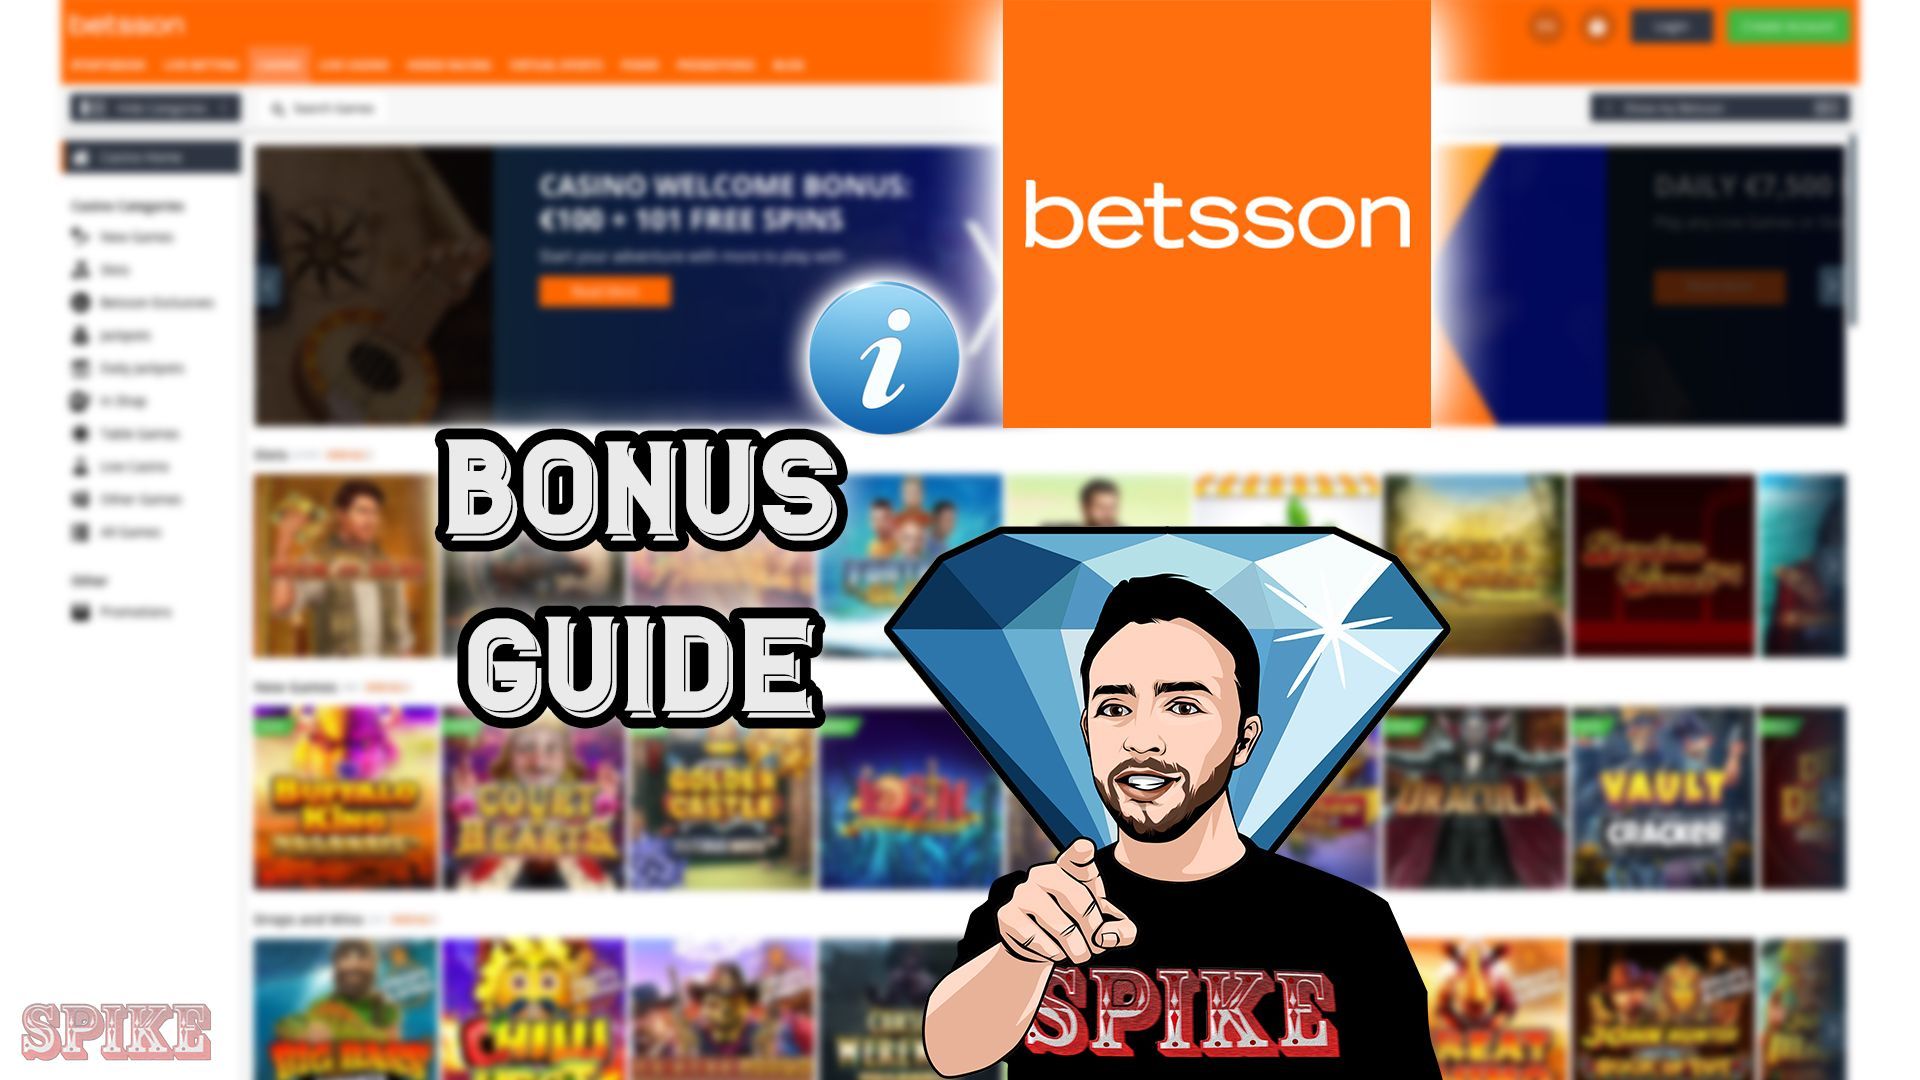 Remarkable Website - Bettson casino Will Help You Get There